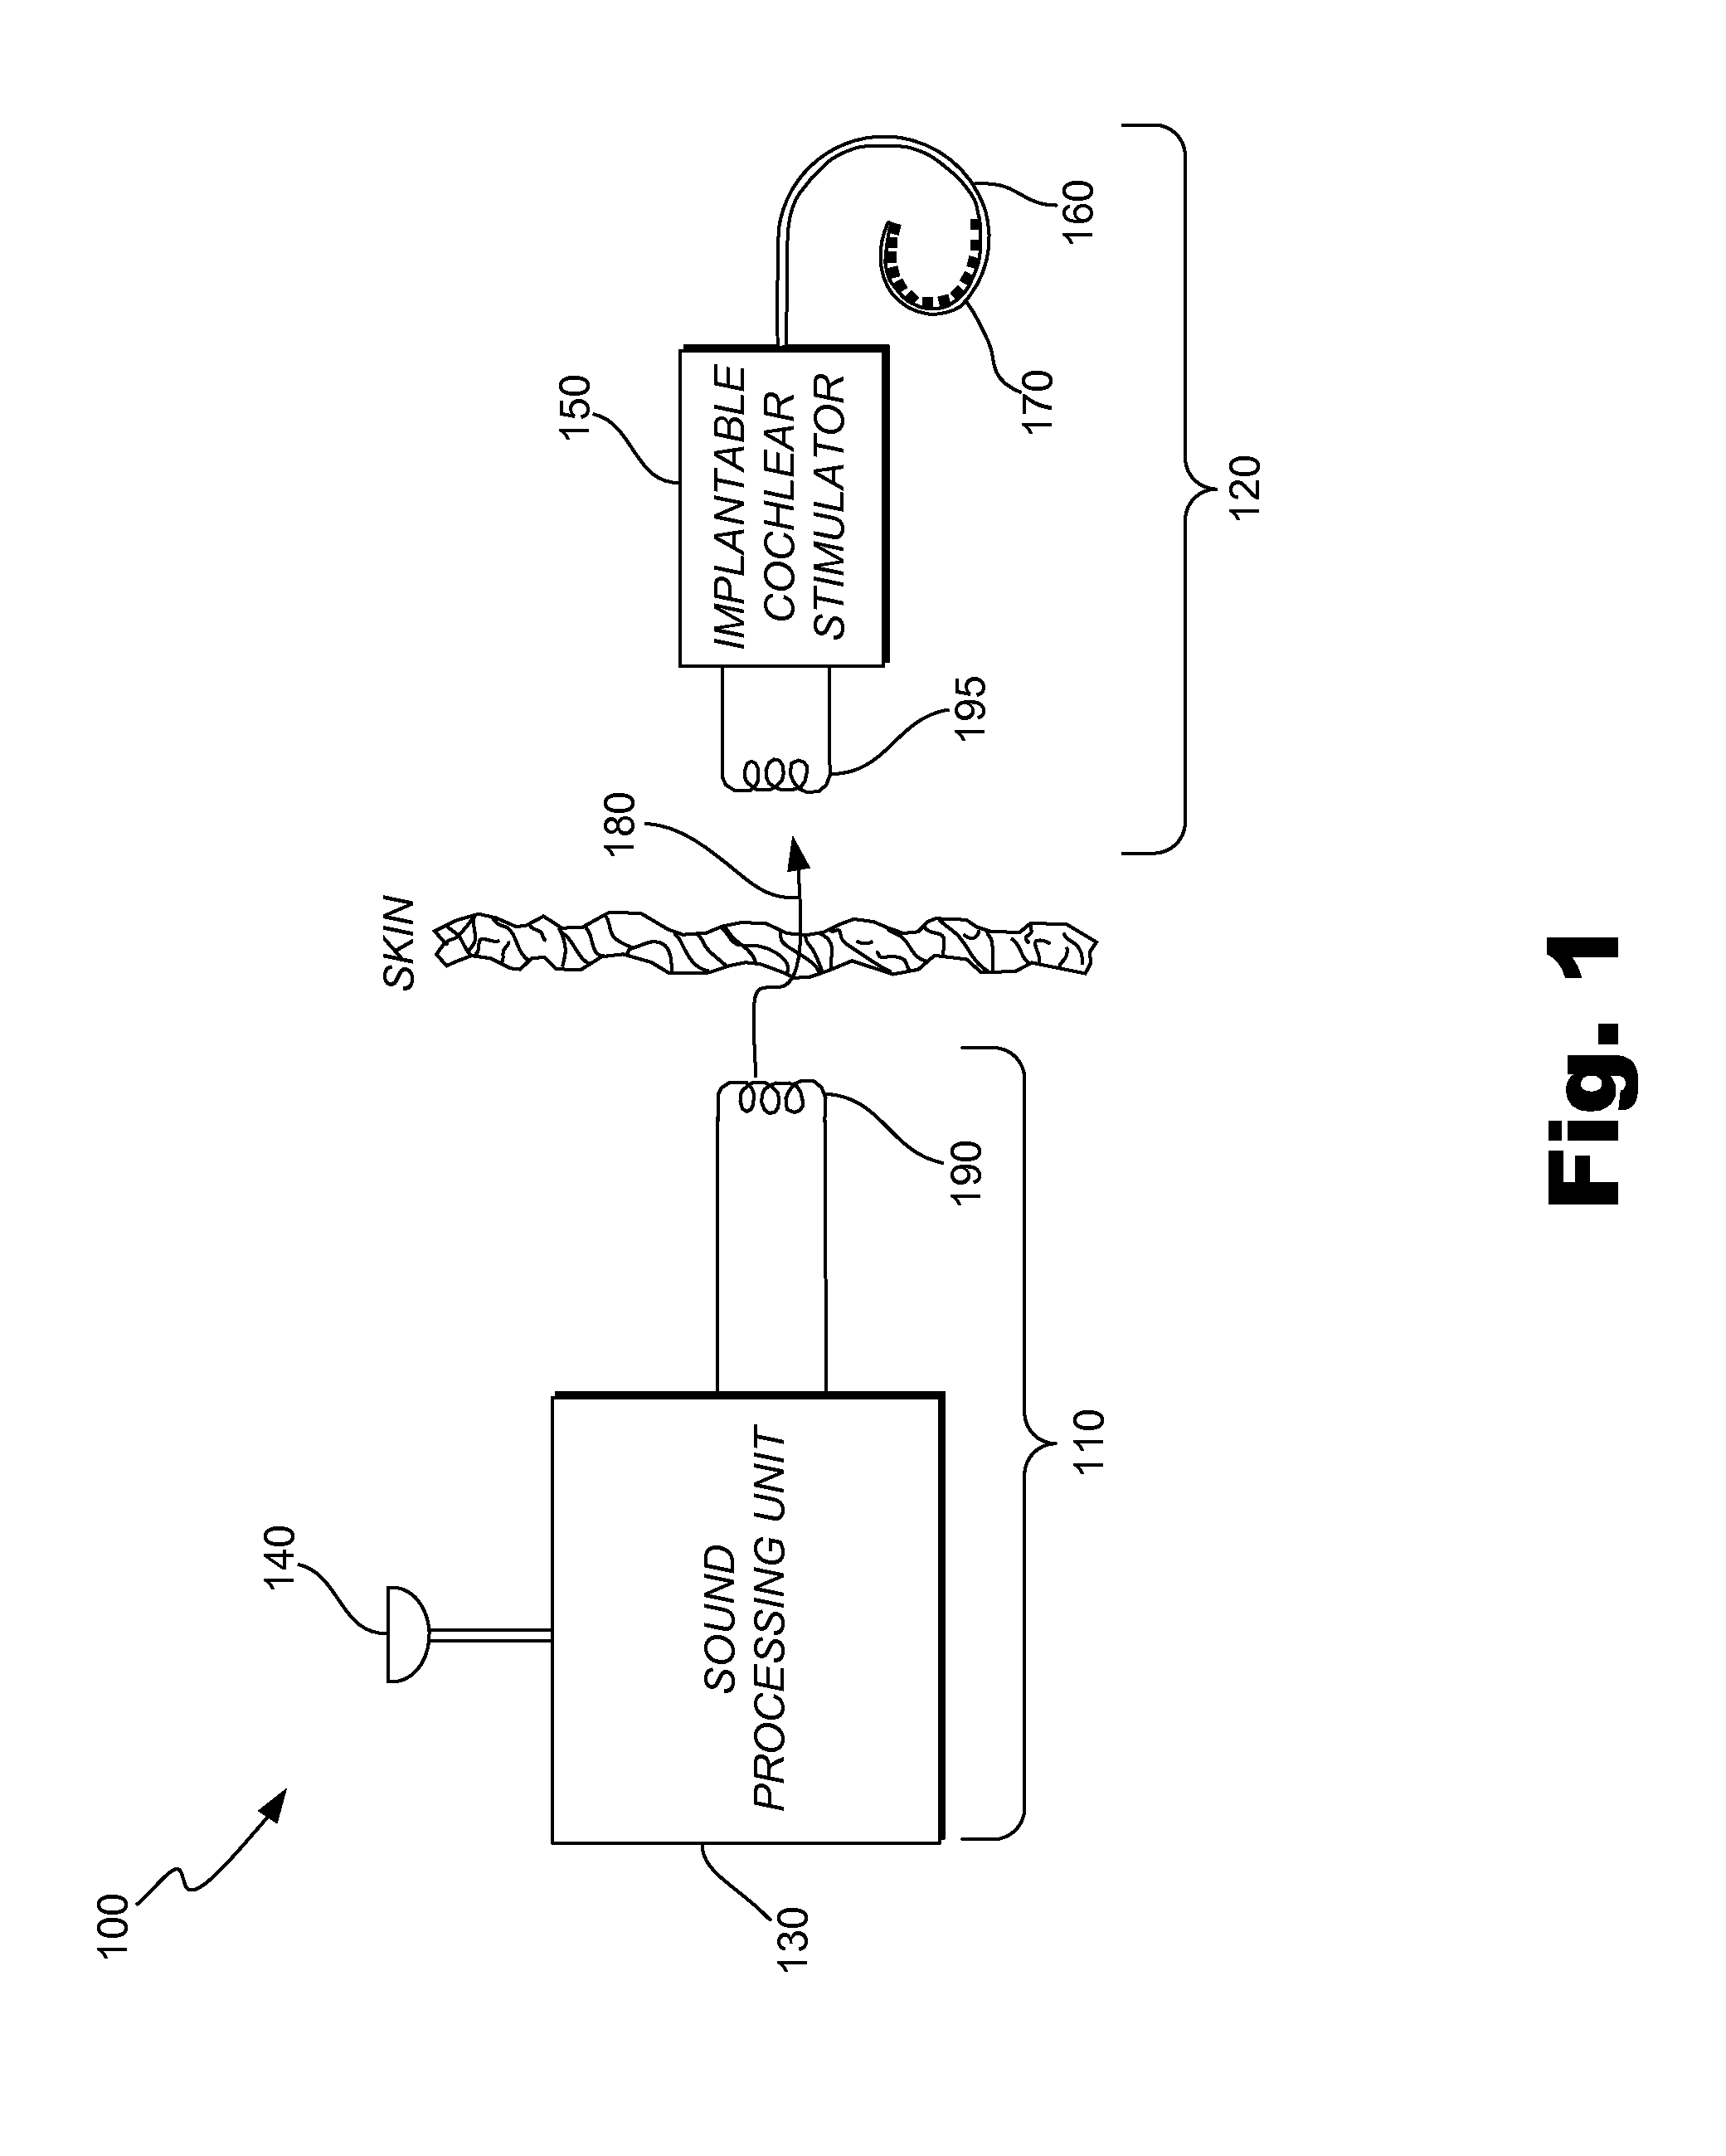 Channel-Specific Adjustment of Sound Processing Strategies Based on Electrode Impedance